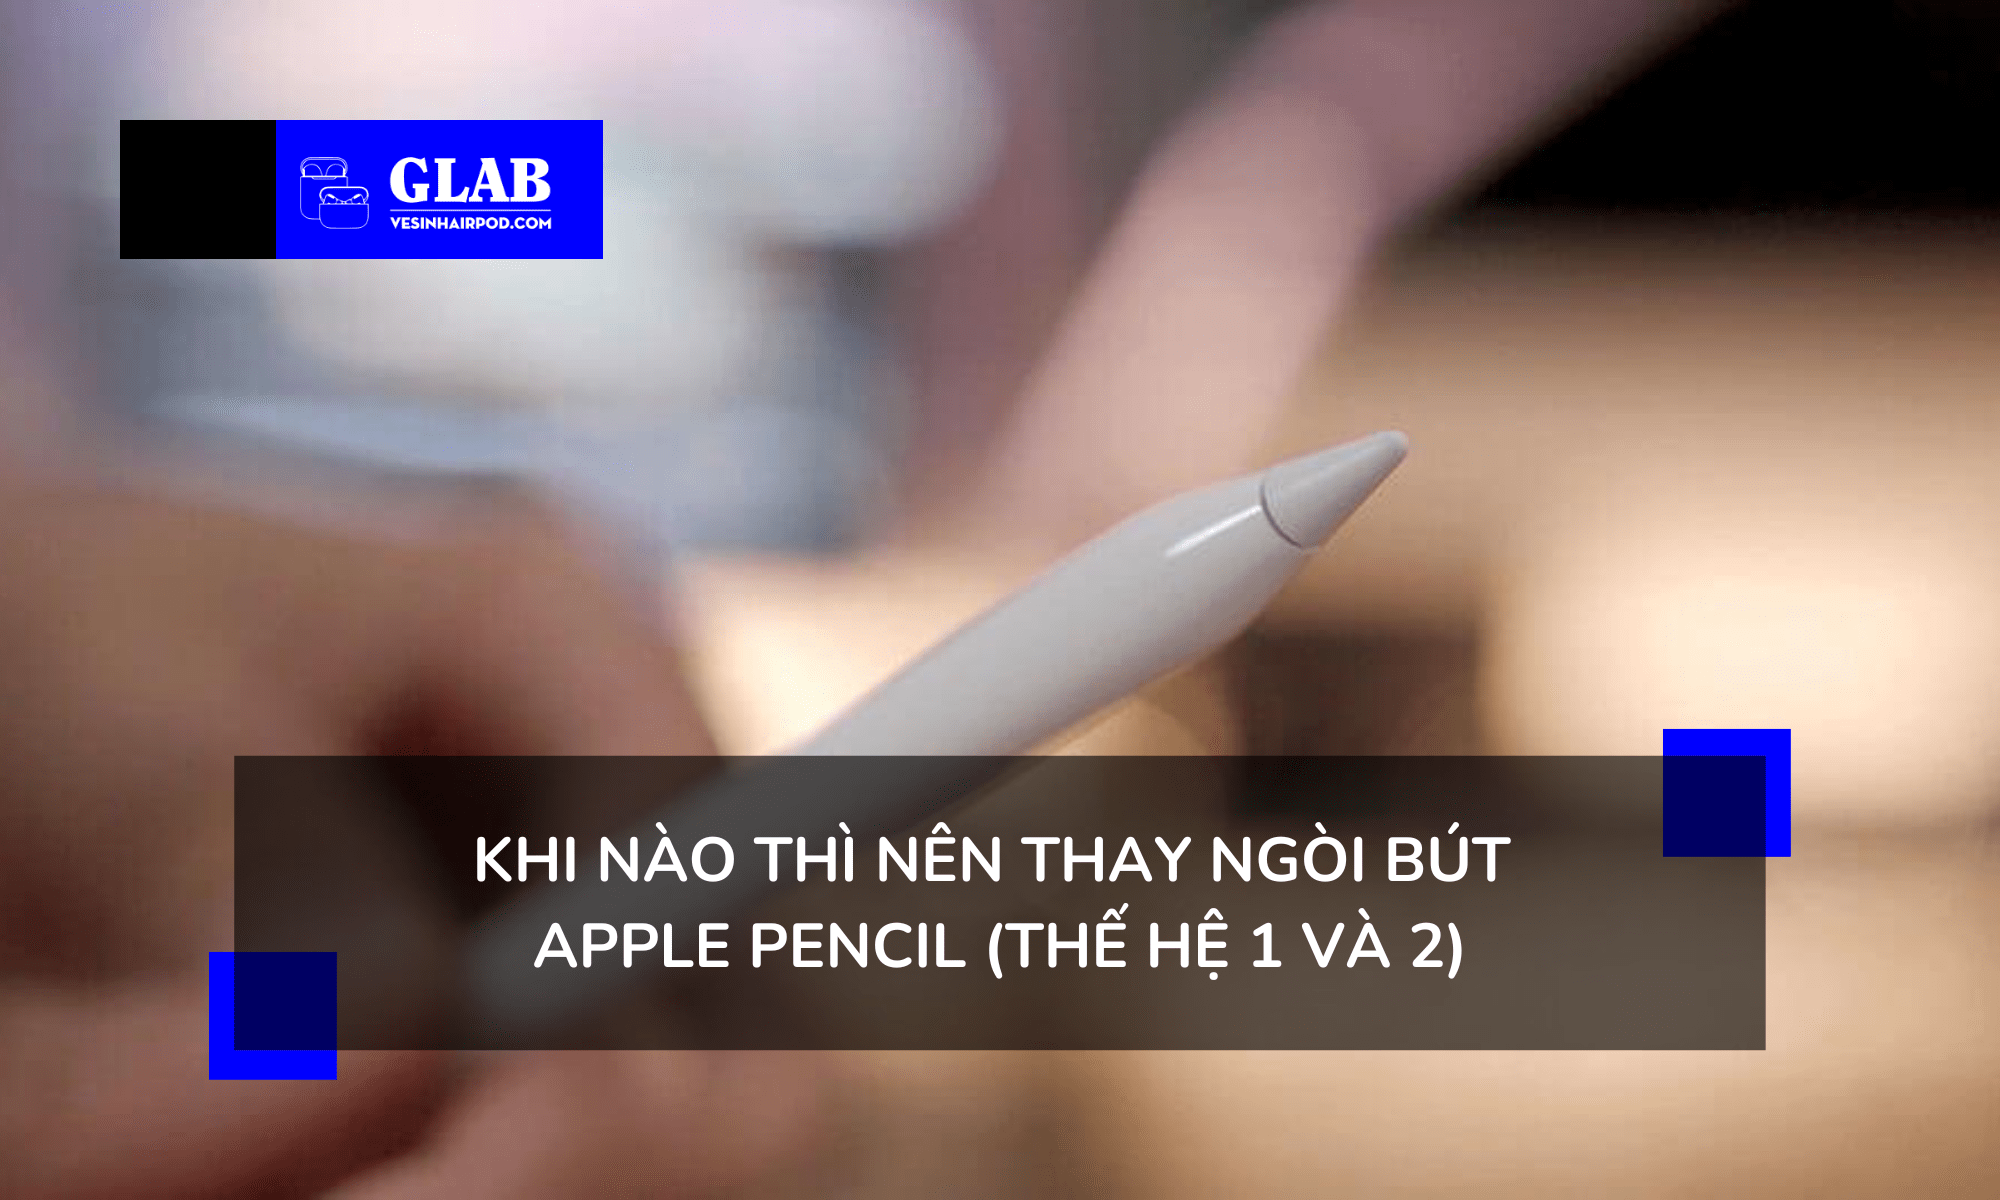 thay-ngoi-but-apple-pencil